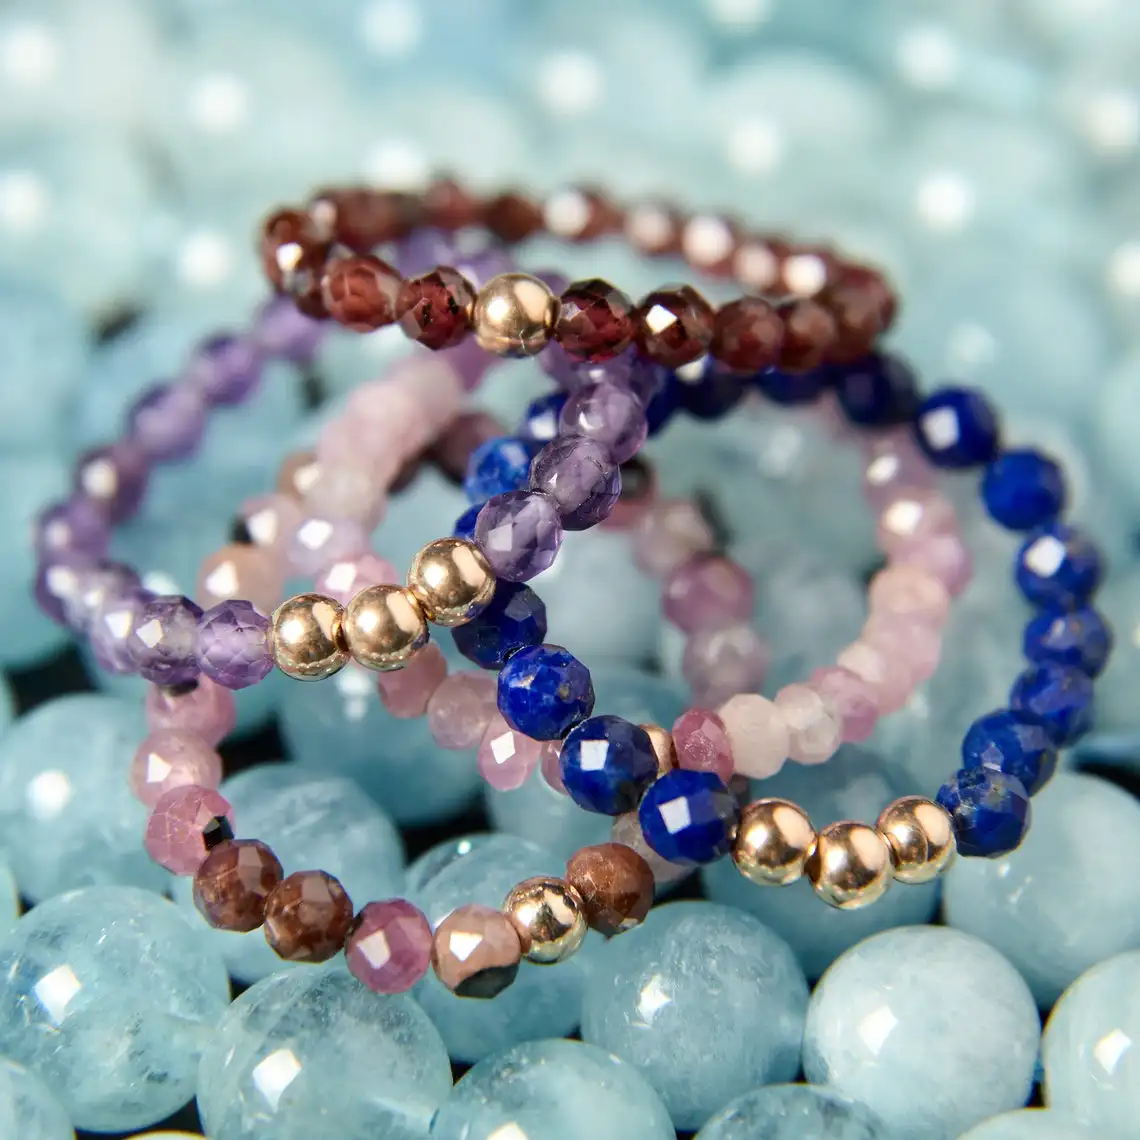 Bohemian Natural Stone Rings with Stainless Steel Bead Crystal Amethyst Lapis Lazuli Handmade Rings Stretch Rope Adjustable